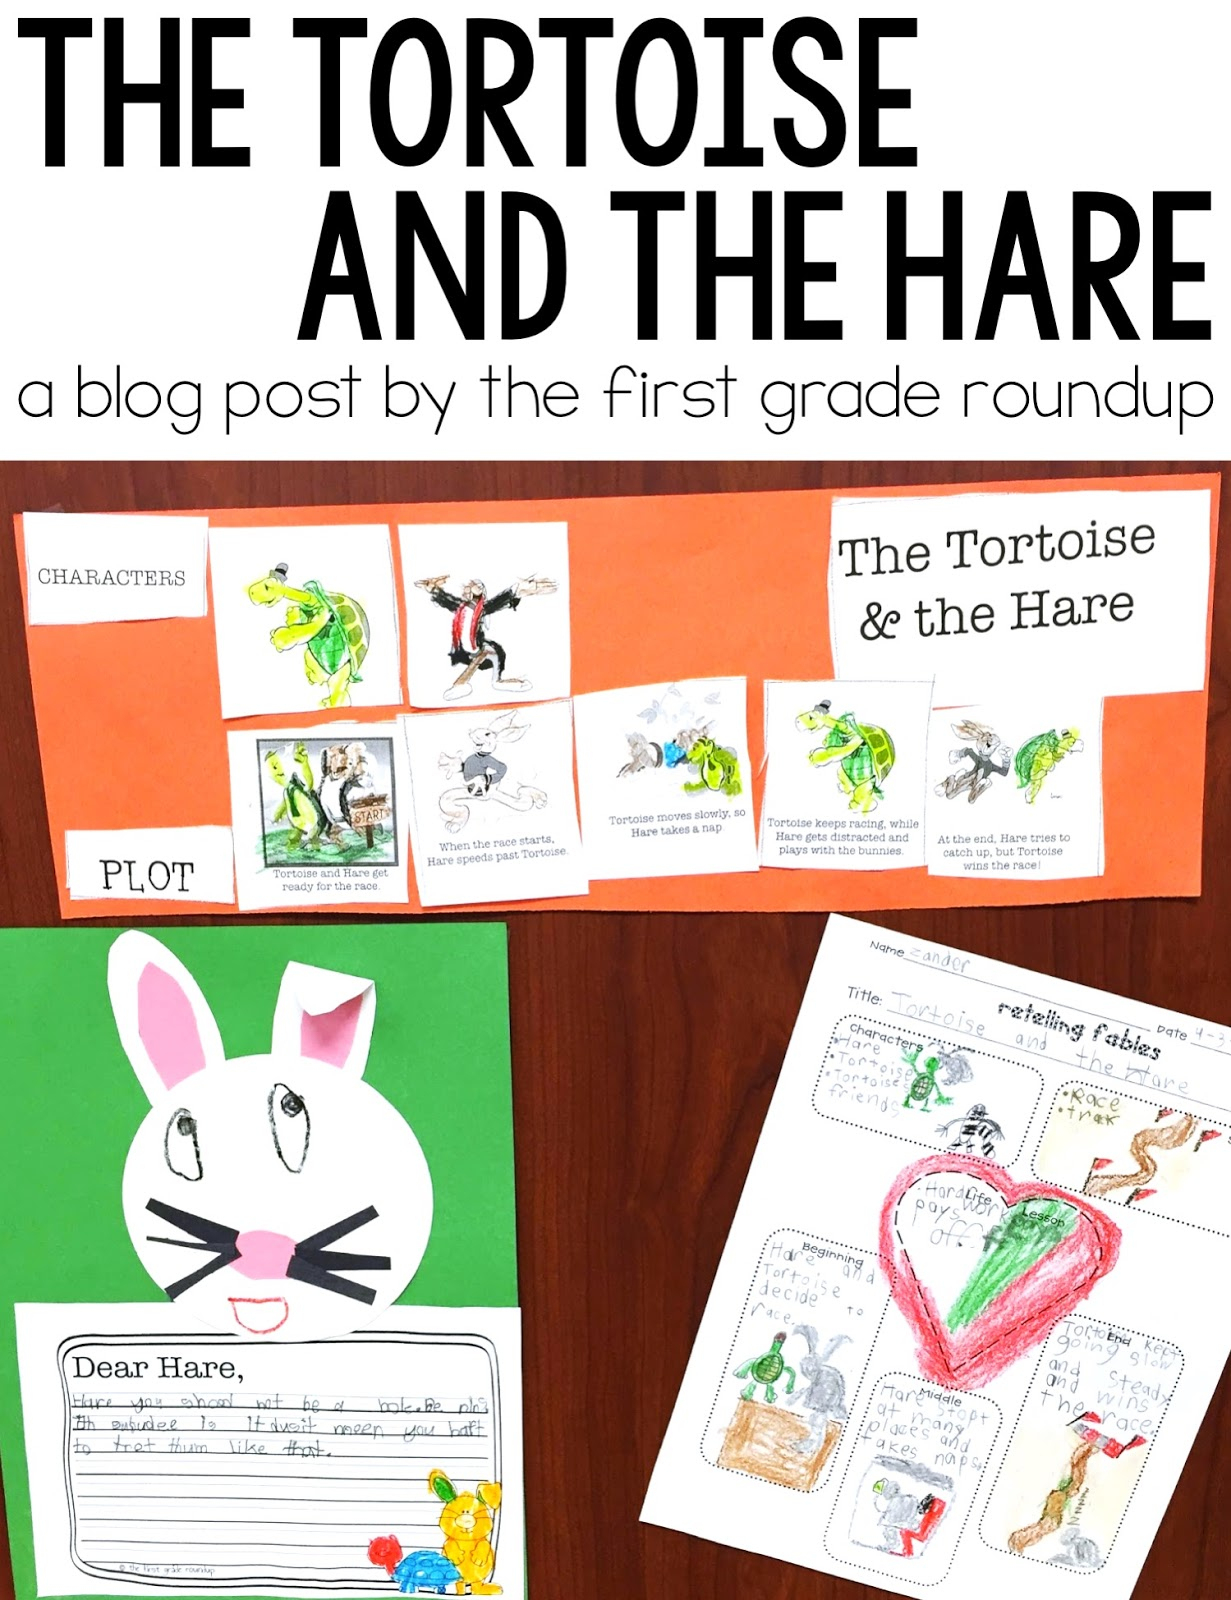 Tortoise And The Hare - Firstgraderoundup